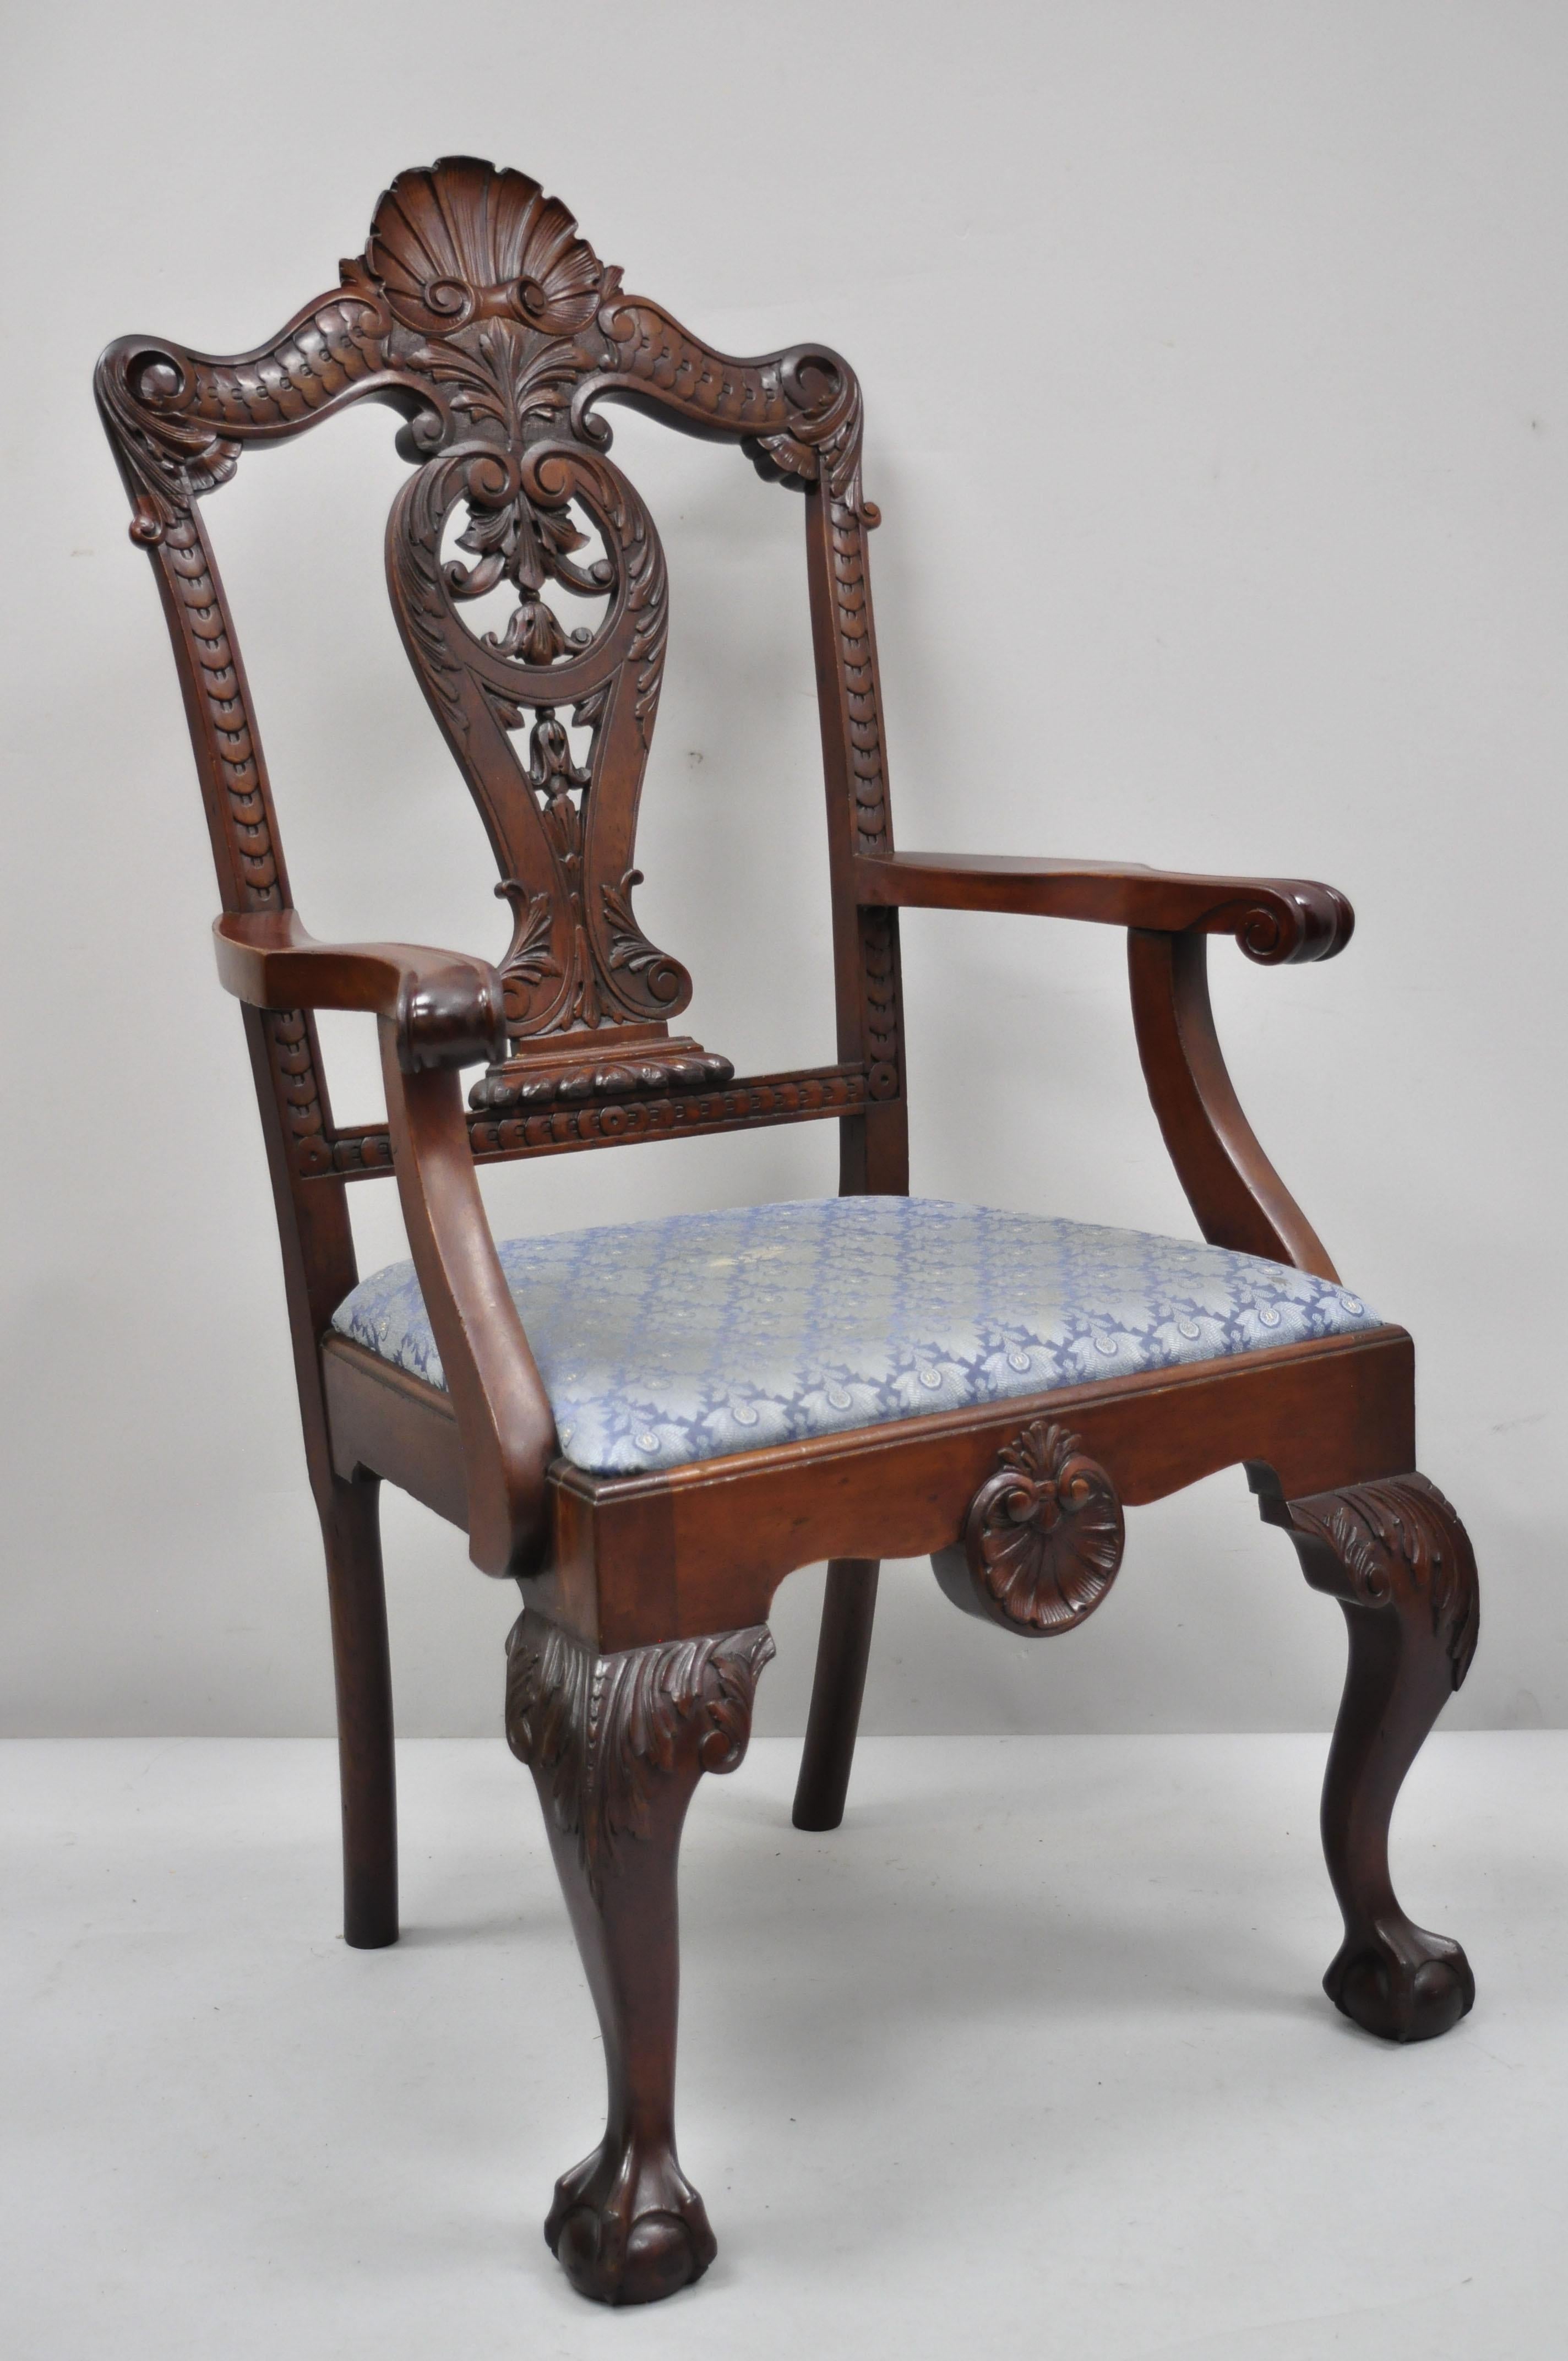 Antique carved mahogany Georgian Chippendale style shell carved ball and claw dining armchair. Item features a tall shell carved back, solid wood construction, beautiful wood grain, finely carved details, carved ball and claw feet, very nice antique